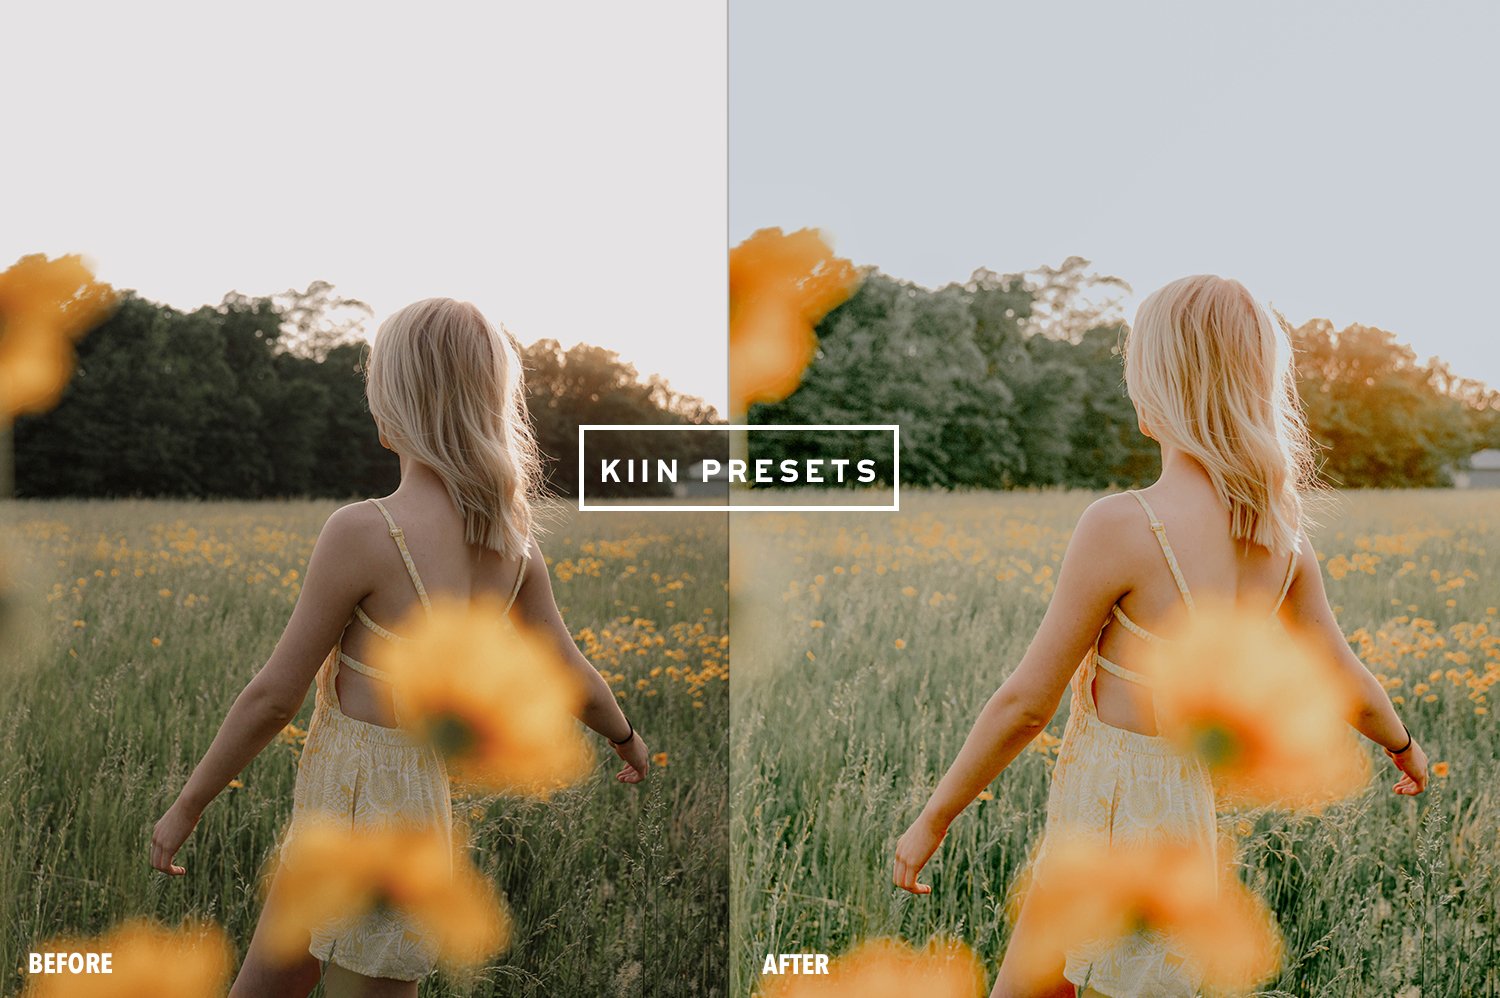 04kiin lightroom presets outdoor presets outdoor filter farm presets blogger filter cottagecore presets country aesthetic presets family presets 25